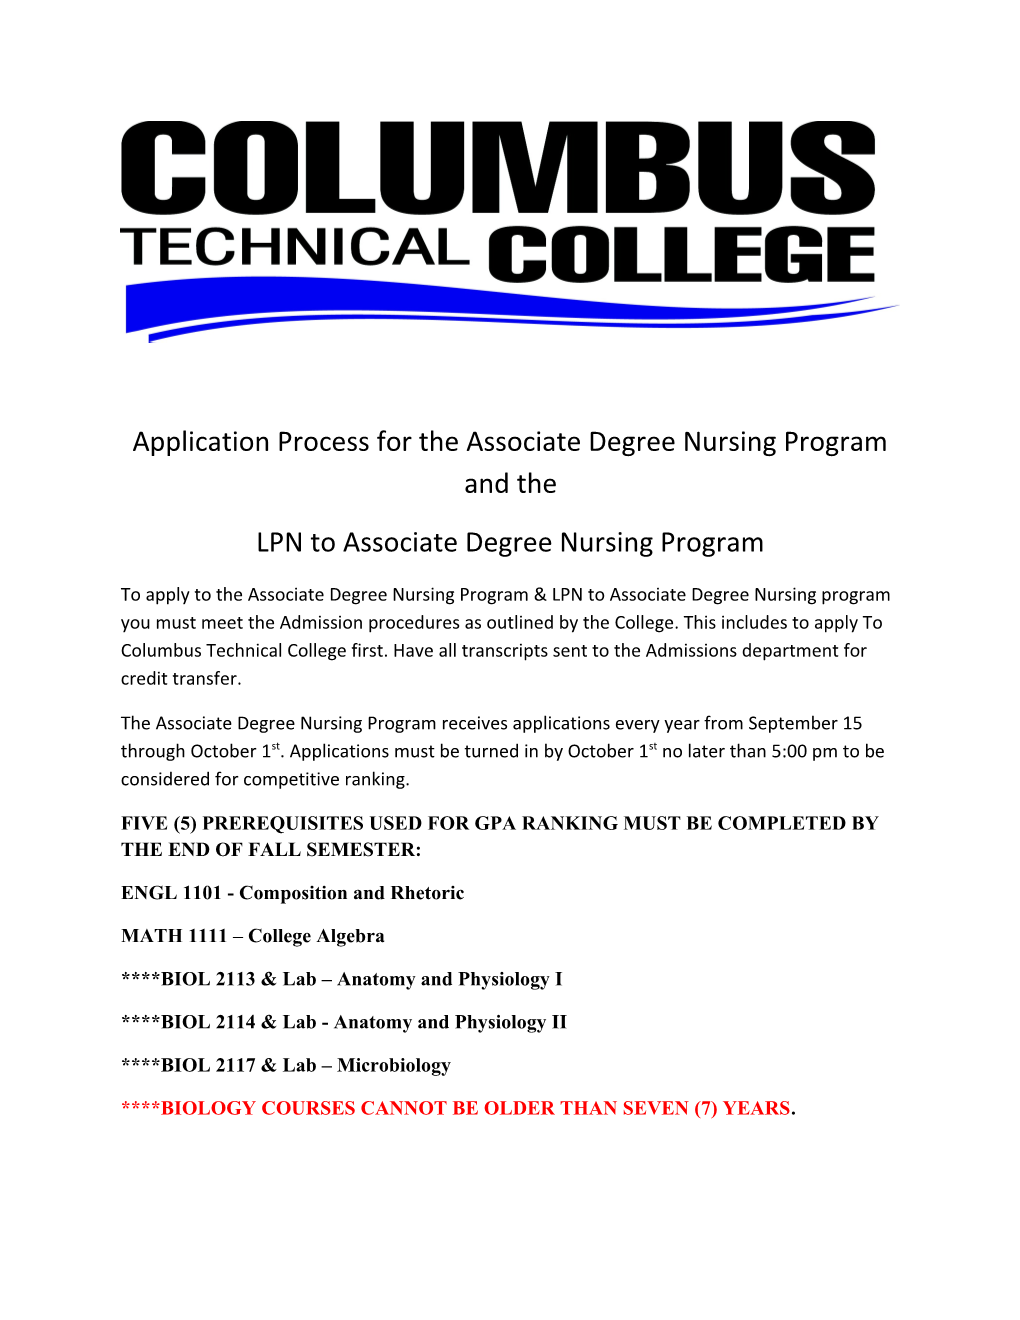 Application Process for the Associate Degree Nursing Program and The